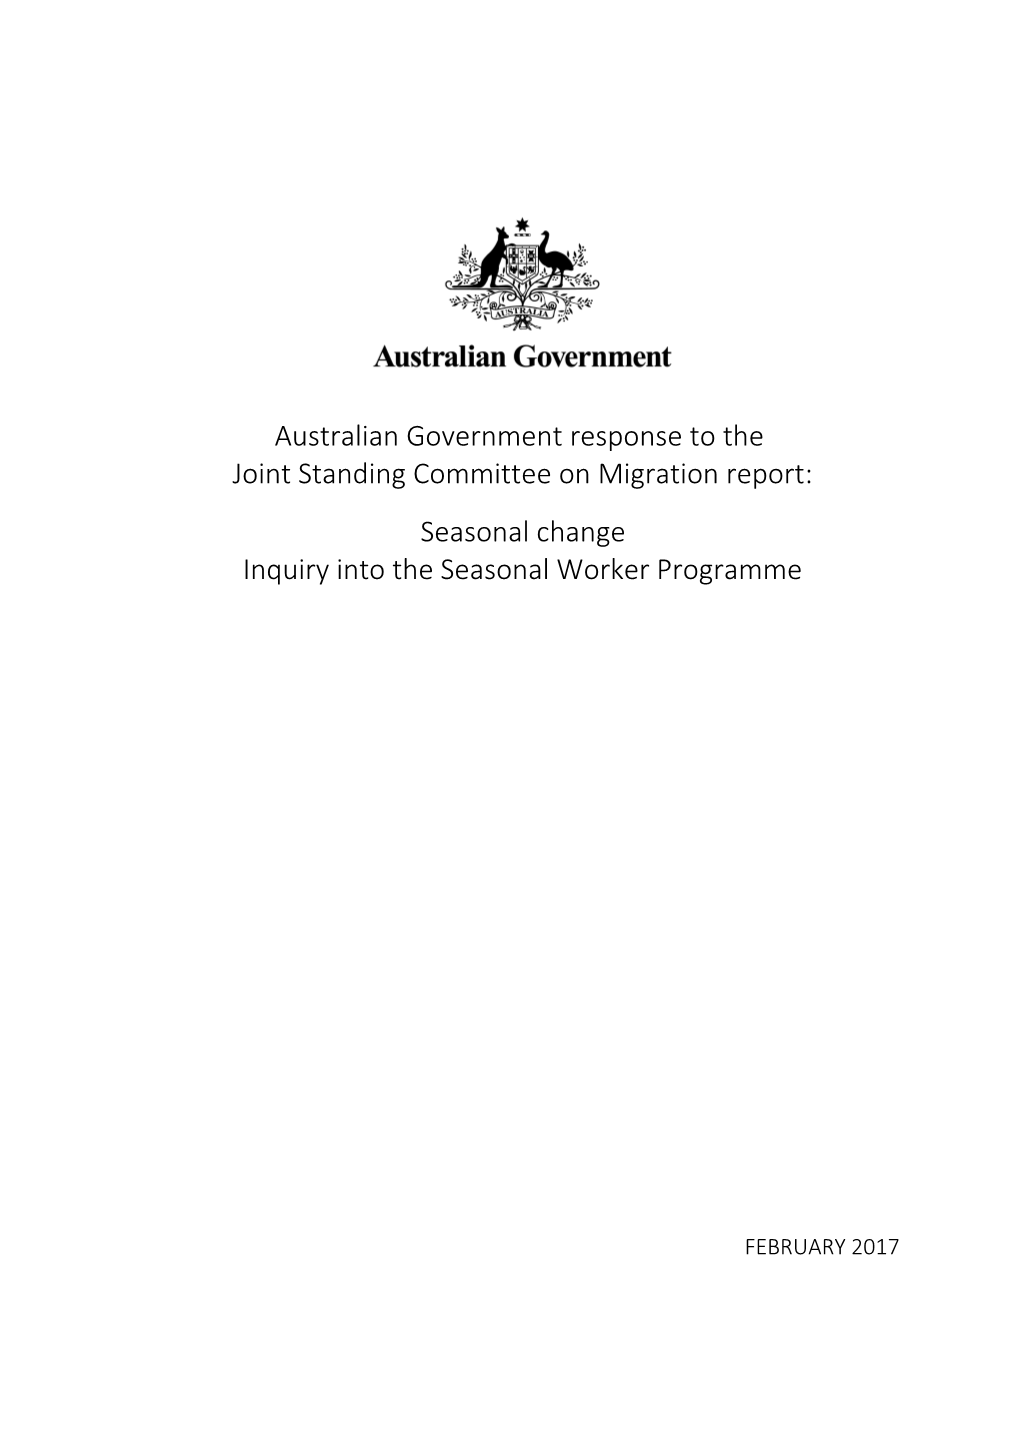 Australian Government Response to the Joint Standing Committee on Migration Report